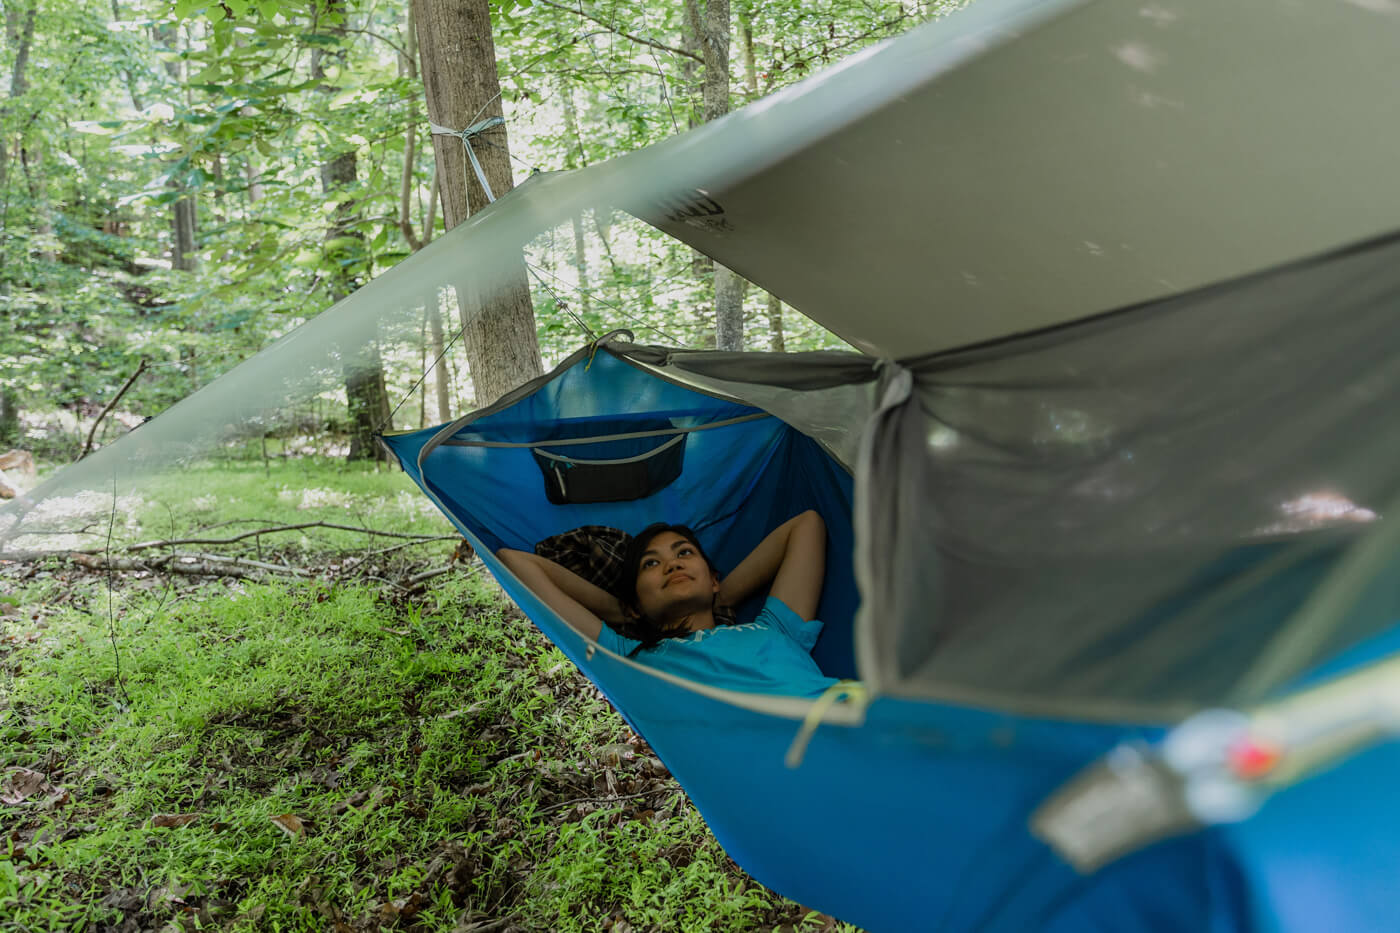 A woman lays in her ENO SkyLite Hammock while camping overnight.